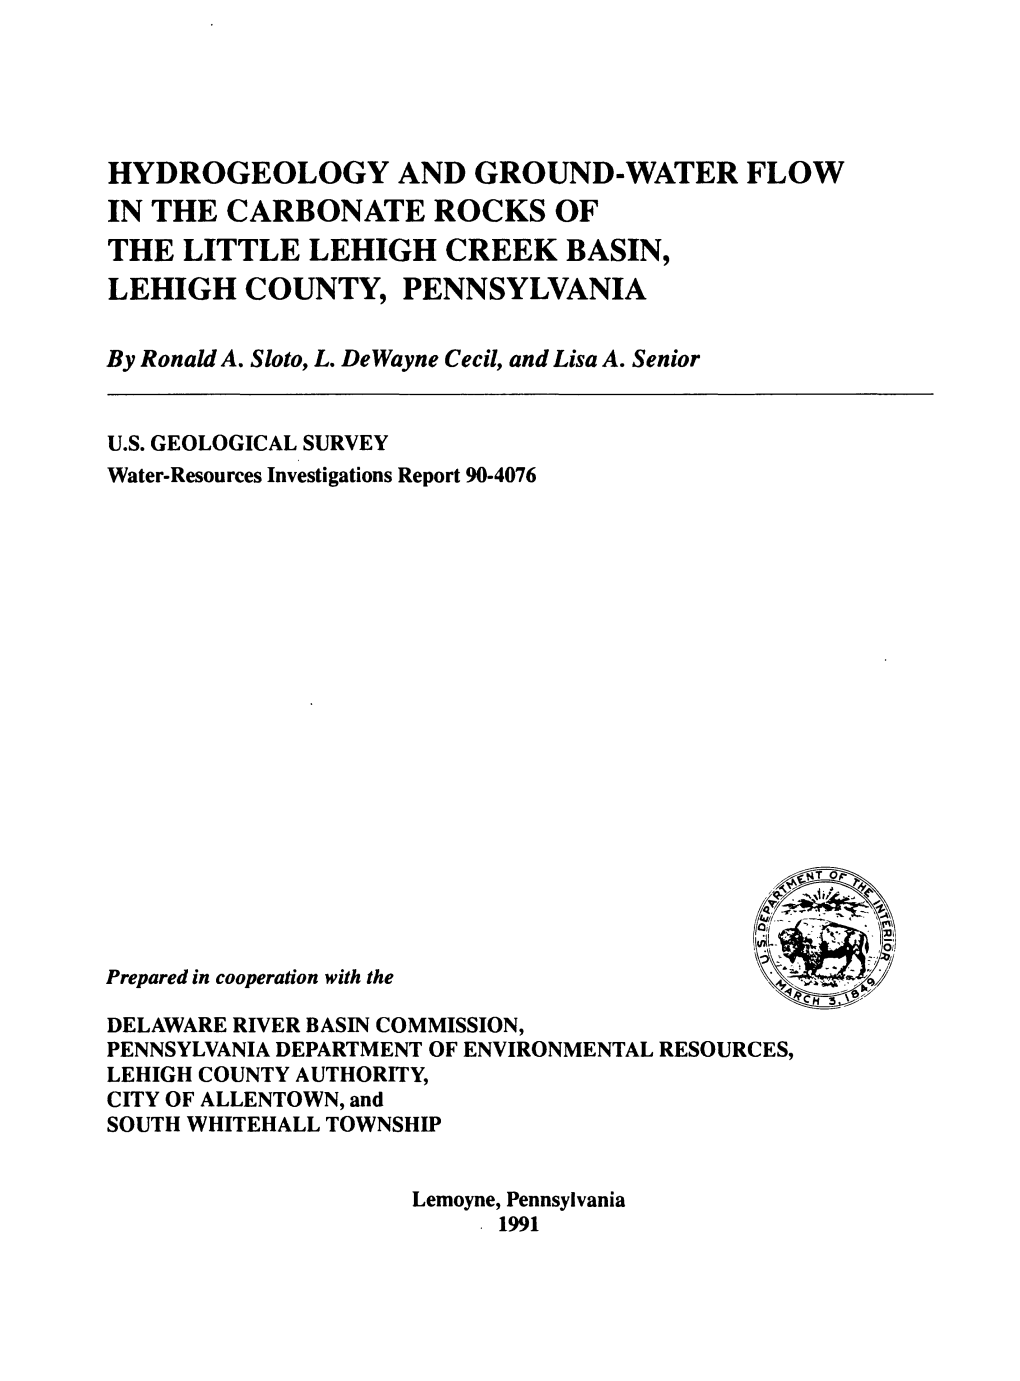 Hydrogeology and Ground-Water Flow in the Carbonate Rocks of the Little Lehigh Creek Basin, Lehigh County, Pennsylvania